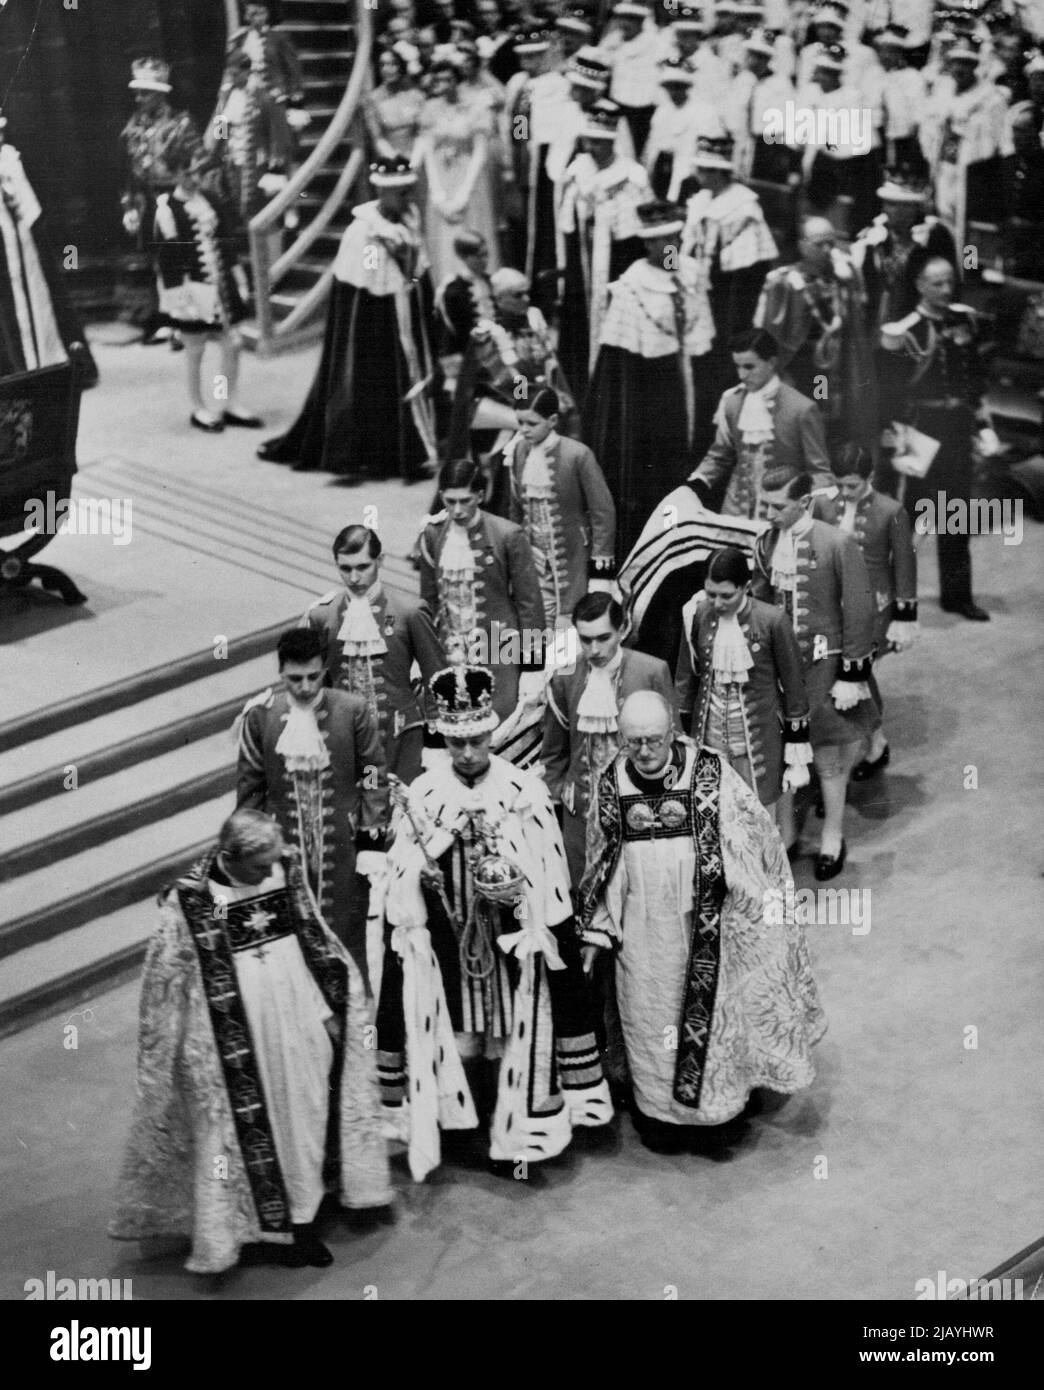 The Coronation Ceremony In Westminster Abbey -- The King carrying the Orb and Sceptre leaving the Abbey after the ceremony. May 12, 1937. (Photo by Sport & General Press Association Limited). Stock Photo